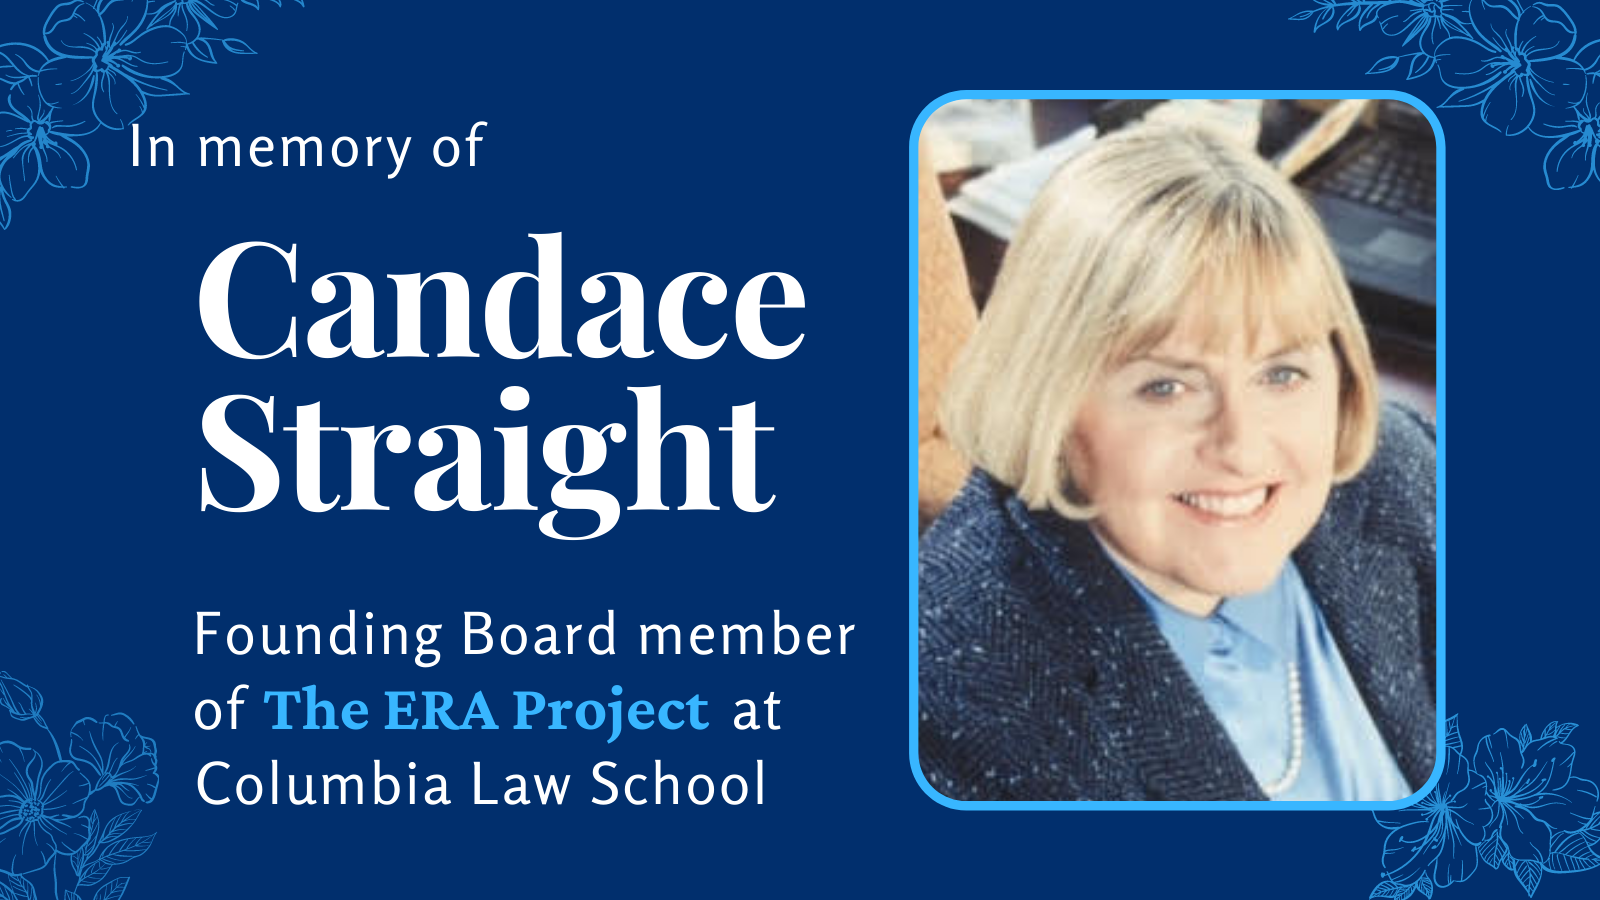 Image containing a photo of Candace Straight with the words "In Memory of Candace Straight, Founding Board Member of the ERA Project at Columbia Law School"